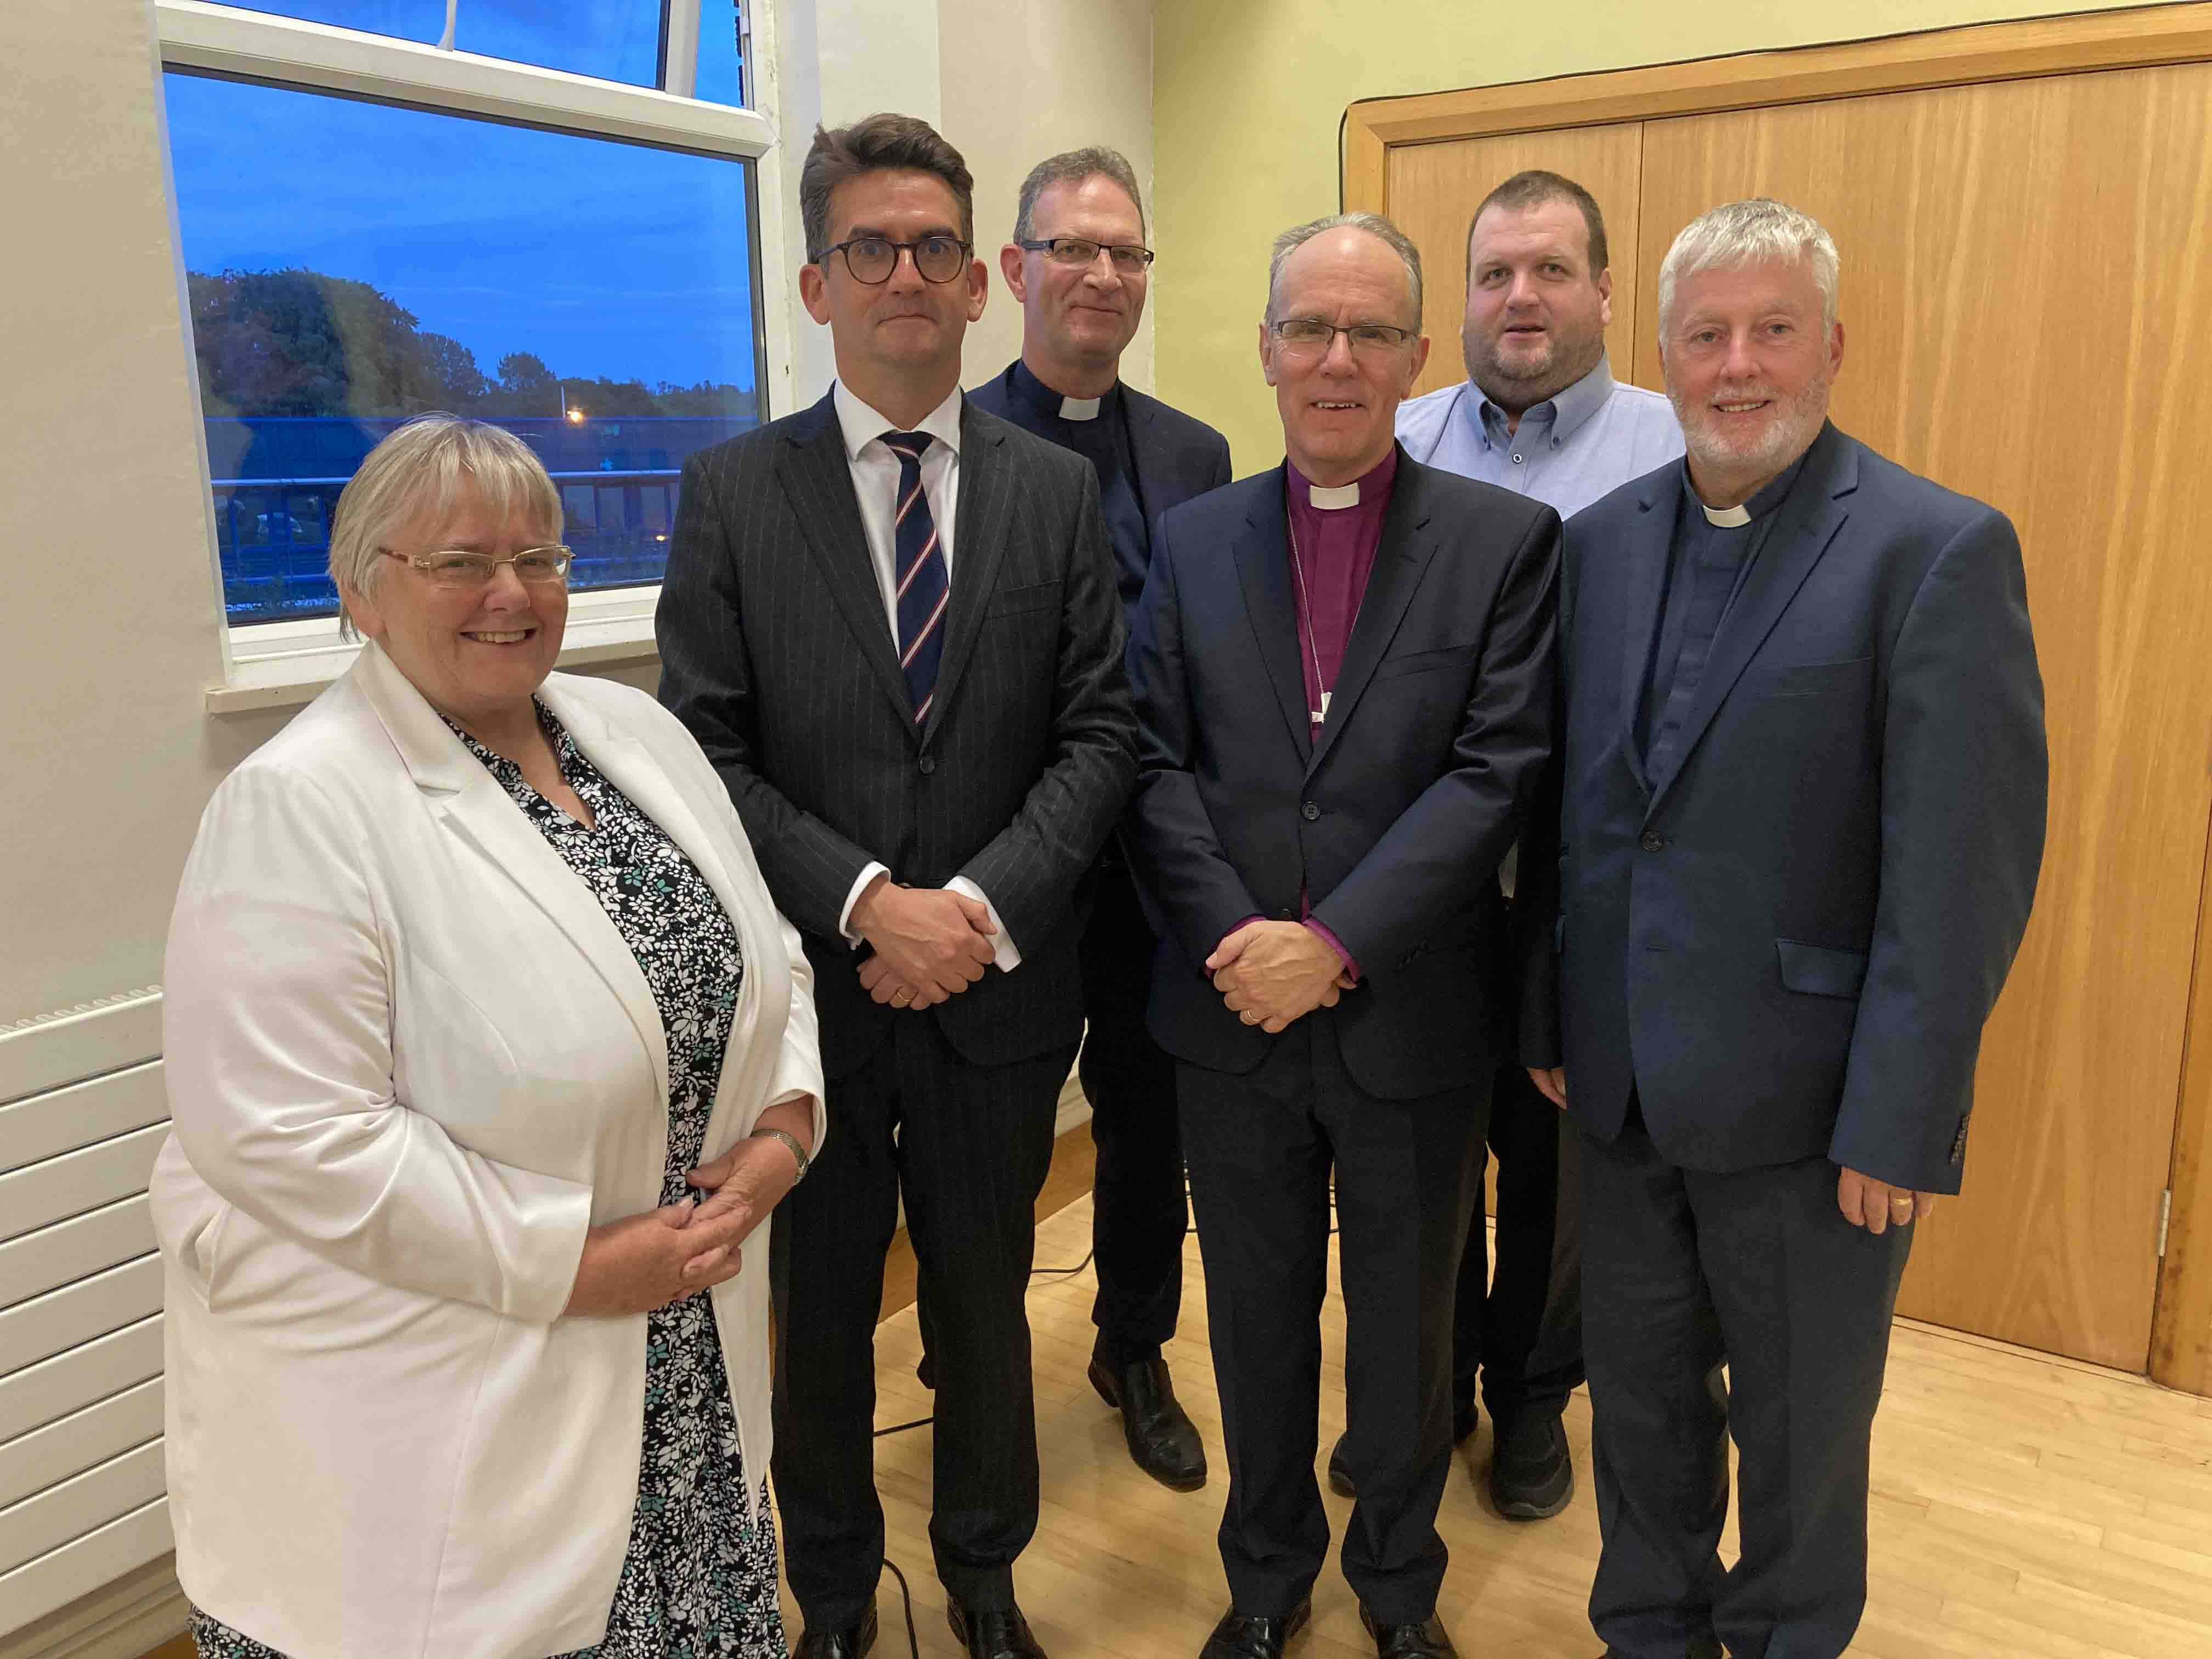 Taking part in the Clogher Diocesan Synod were (from left): Mrs Rosemary Barton, Honorary Secretary of Diocesan Synod; Mr Adrian Colmer KC, Assessor; Dean Kenneth Hall; Bishop Ian Ellis; Mr Glenn Moore, Diocesan Secretary; and Archdeacon Brian Harper.